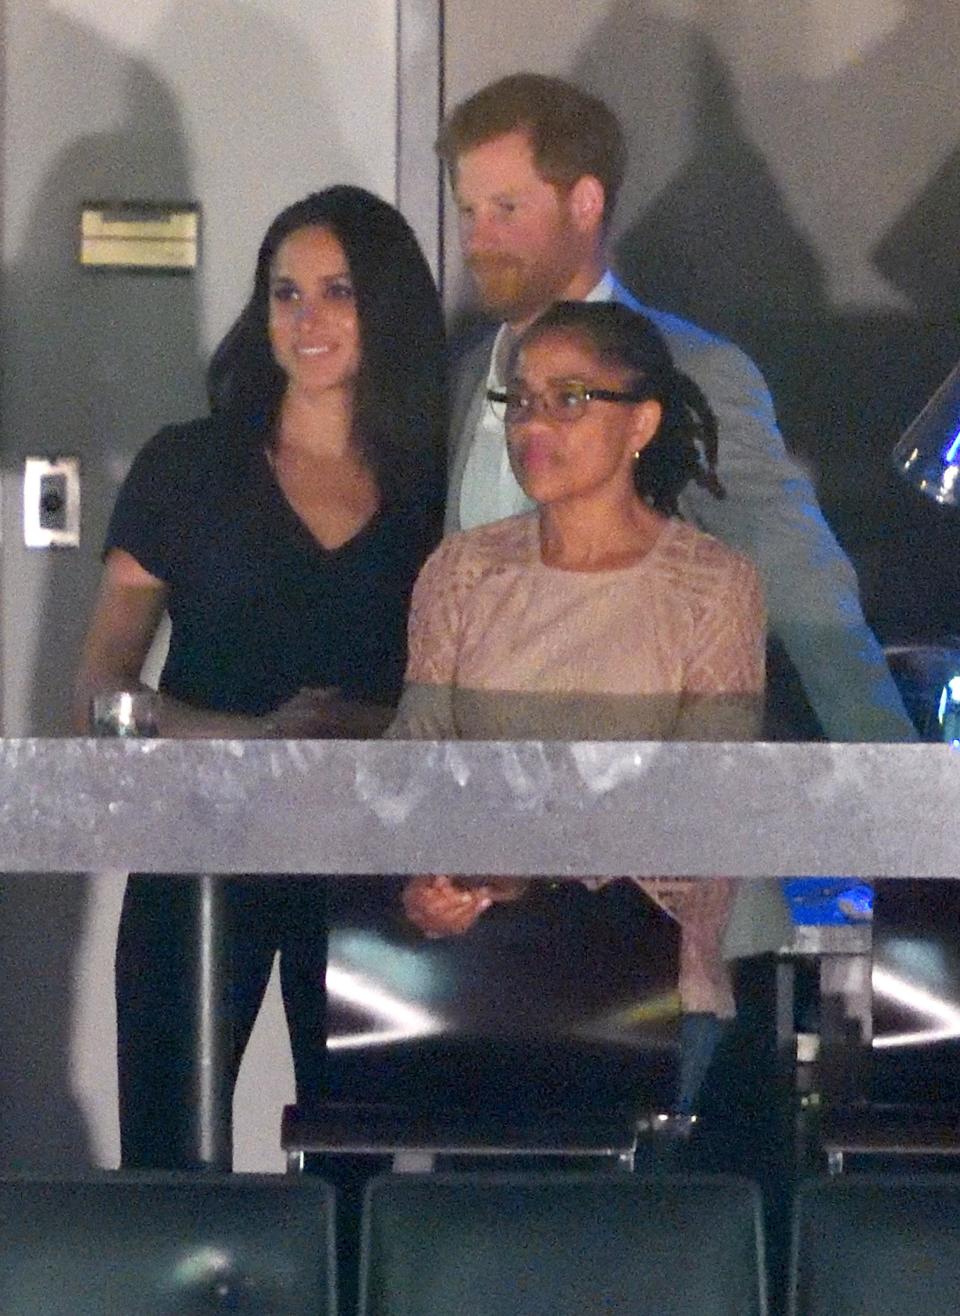 Meghan's reportedly won the royal family over, but Harry's no slouch when it comes to wooing his girlfriend's nearest and dearest either. Prince Harry reportedly broke with royal protocol to be seen with Meghan's mum Doria Radlan at the Invictus Games closing ceremony... and it wouldn't surprise us if he's gone rogue with a secret engagement as well.